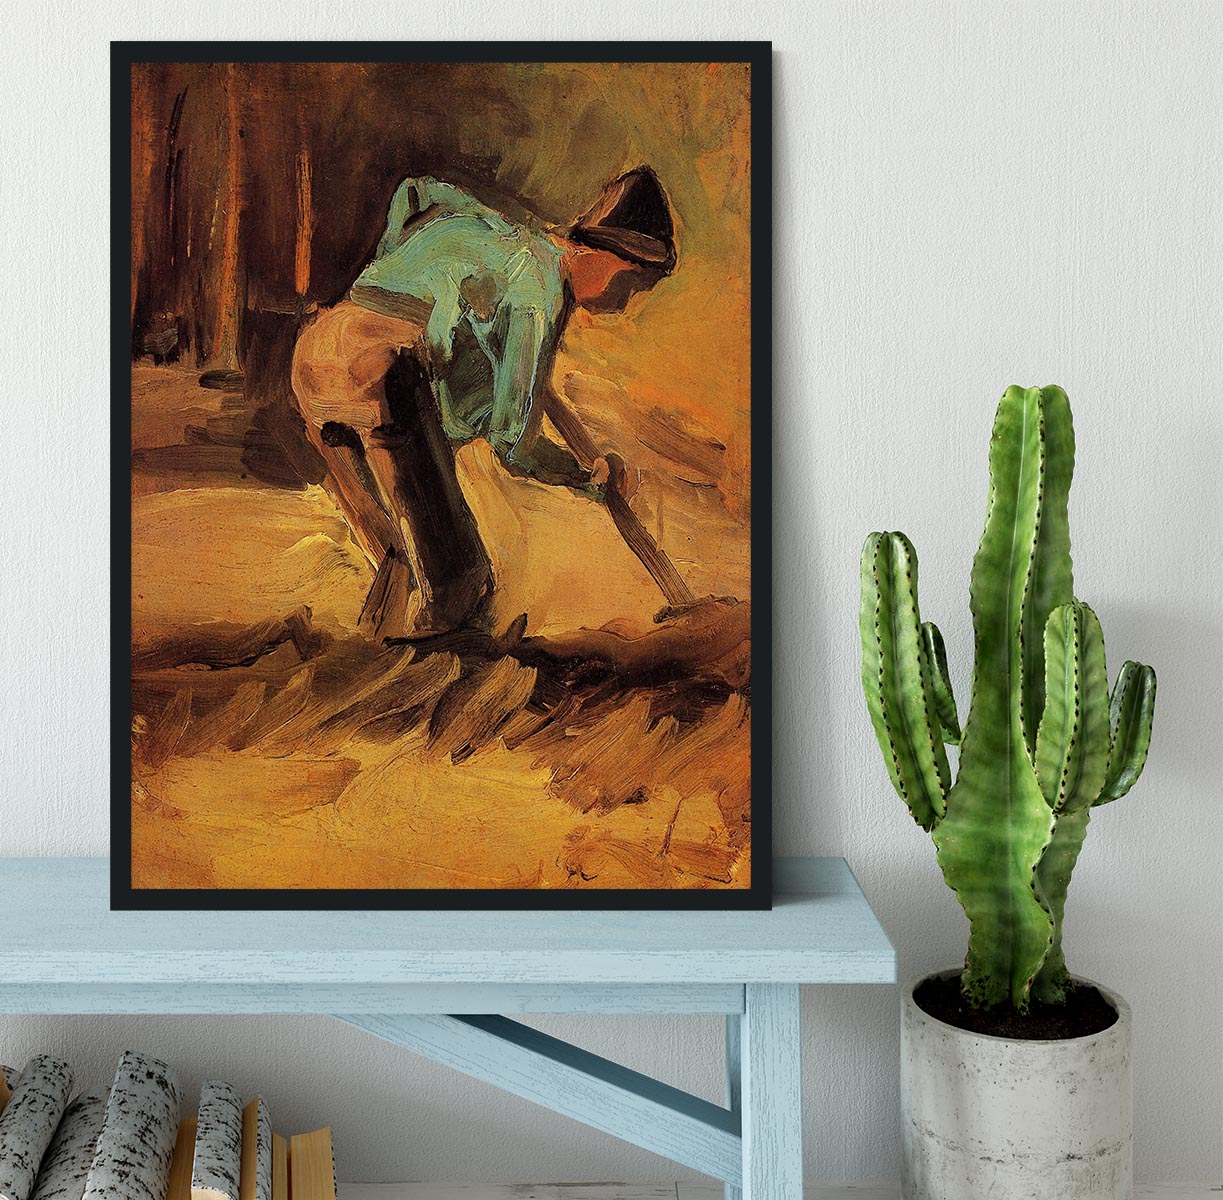 Man Stooping with Stick or Spade by Van Gogh Framed Print - Canvas Art Rocks - 2